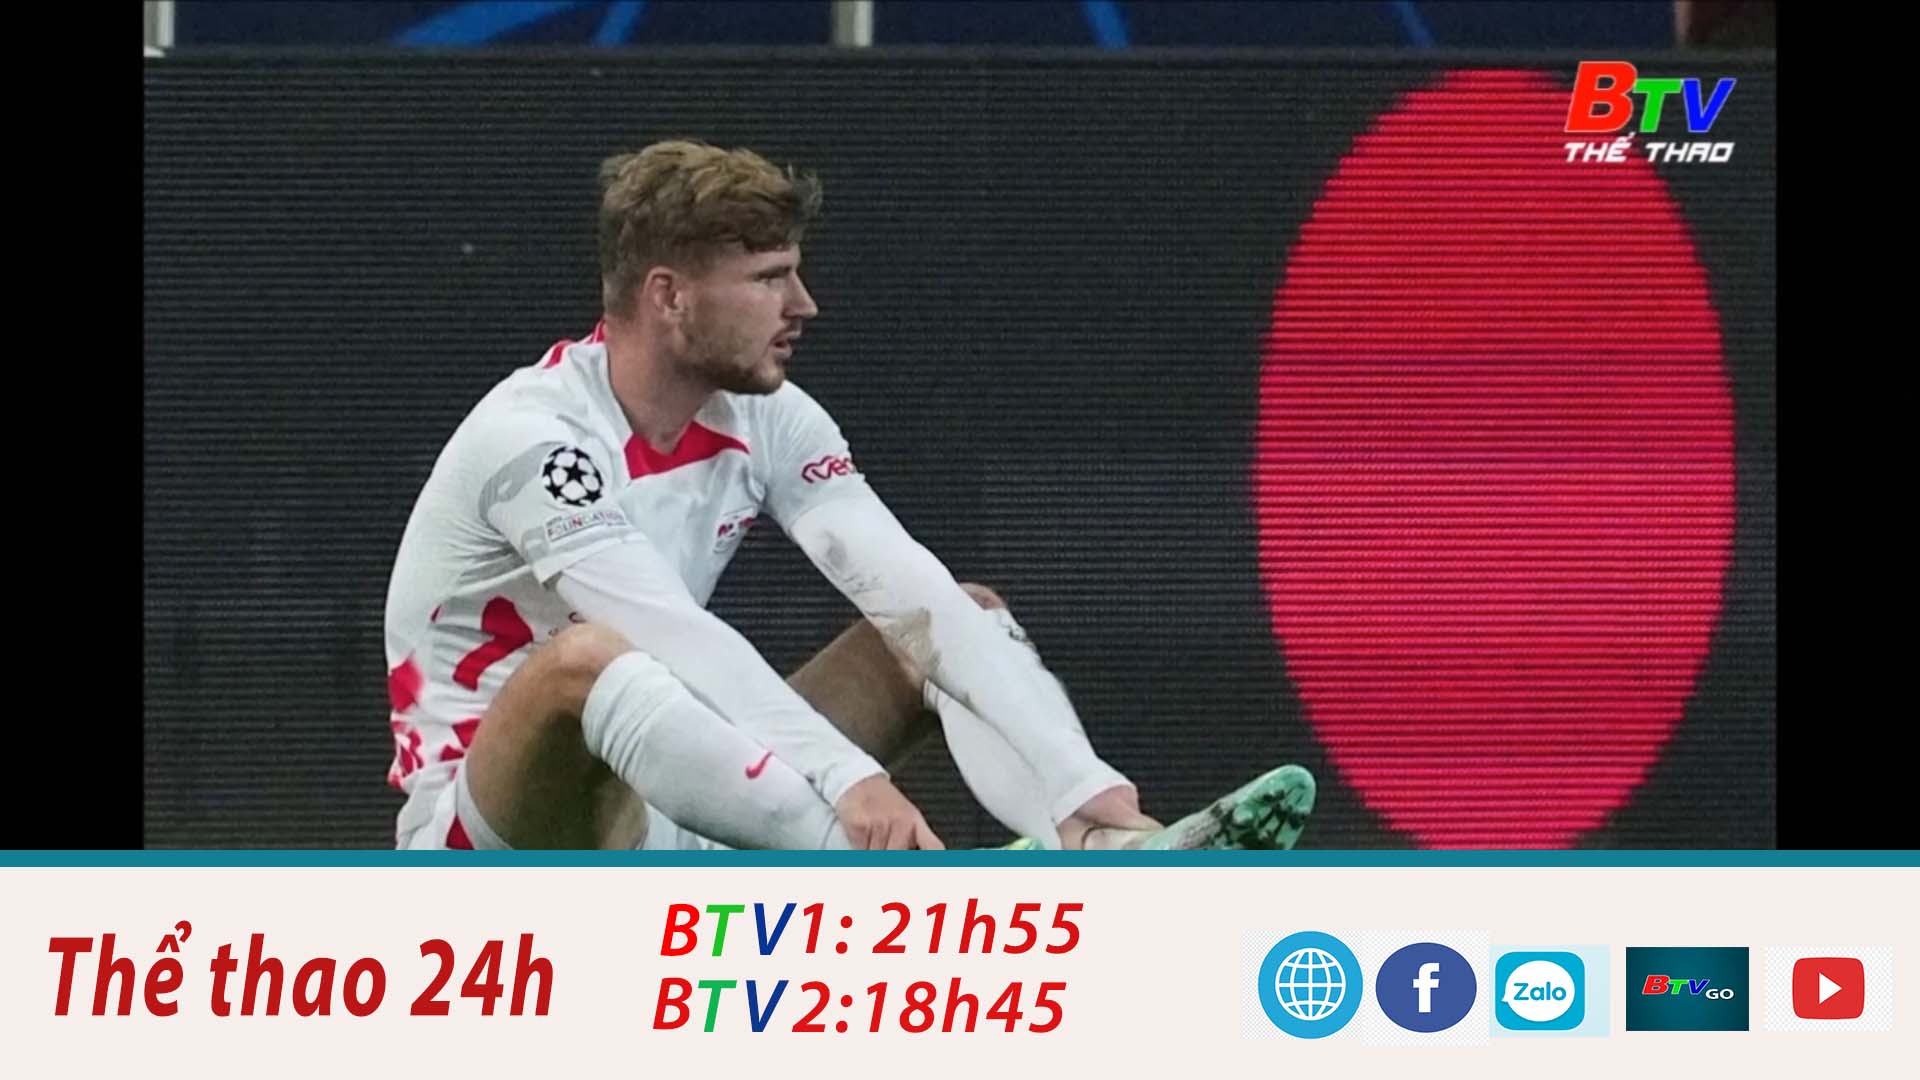 Timo Werner vắng mặt ở World Cup 2022